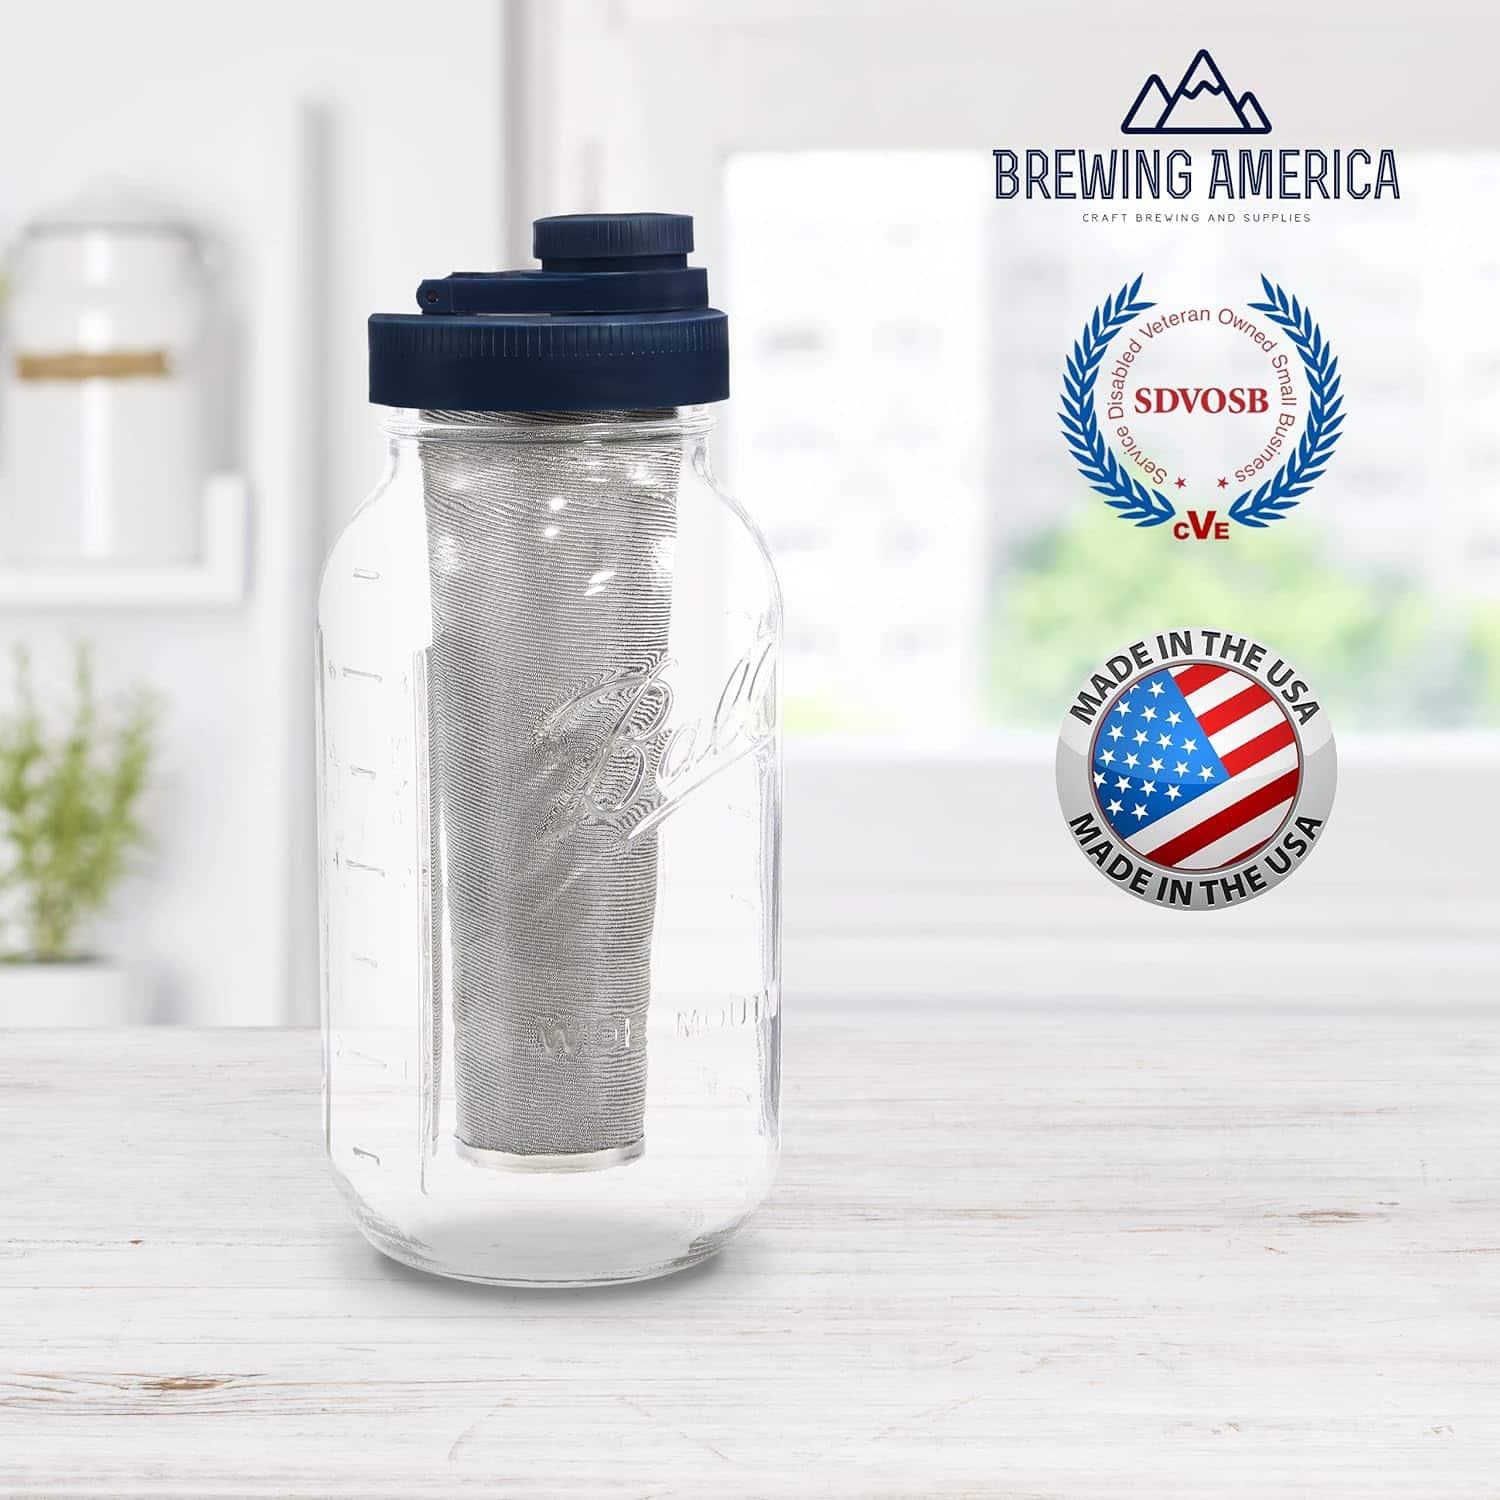 Brewing America Mason Jar Cold Brew Coffee Maker: The Ultimate Review